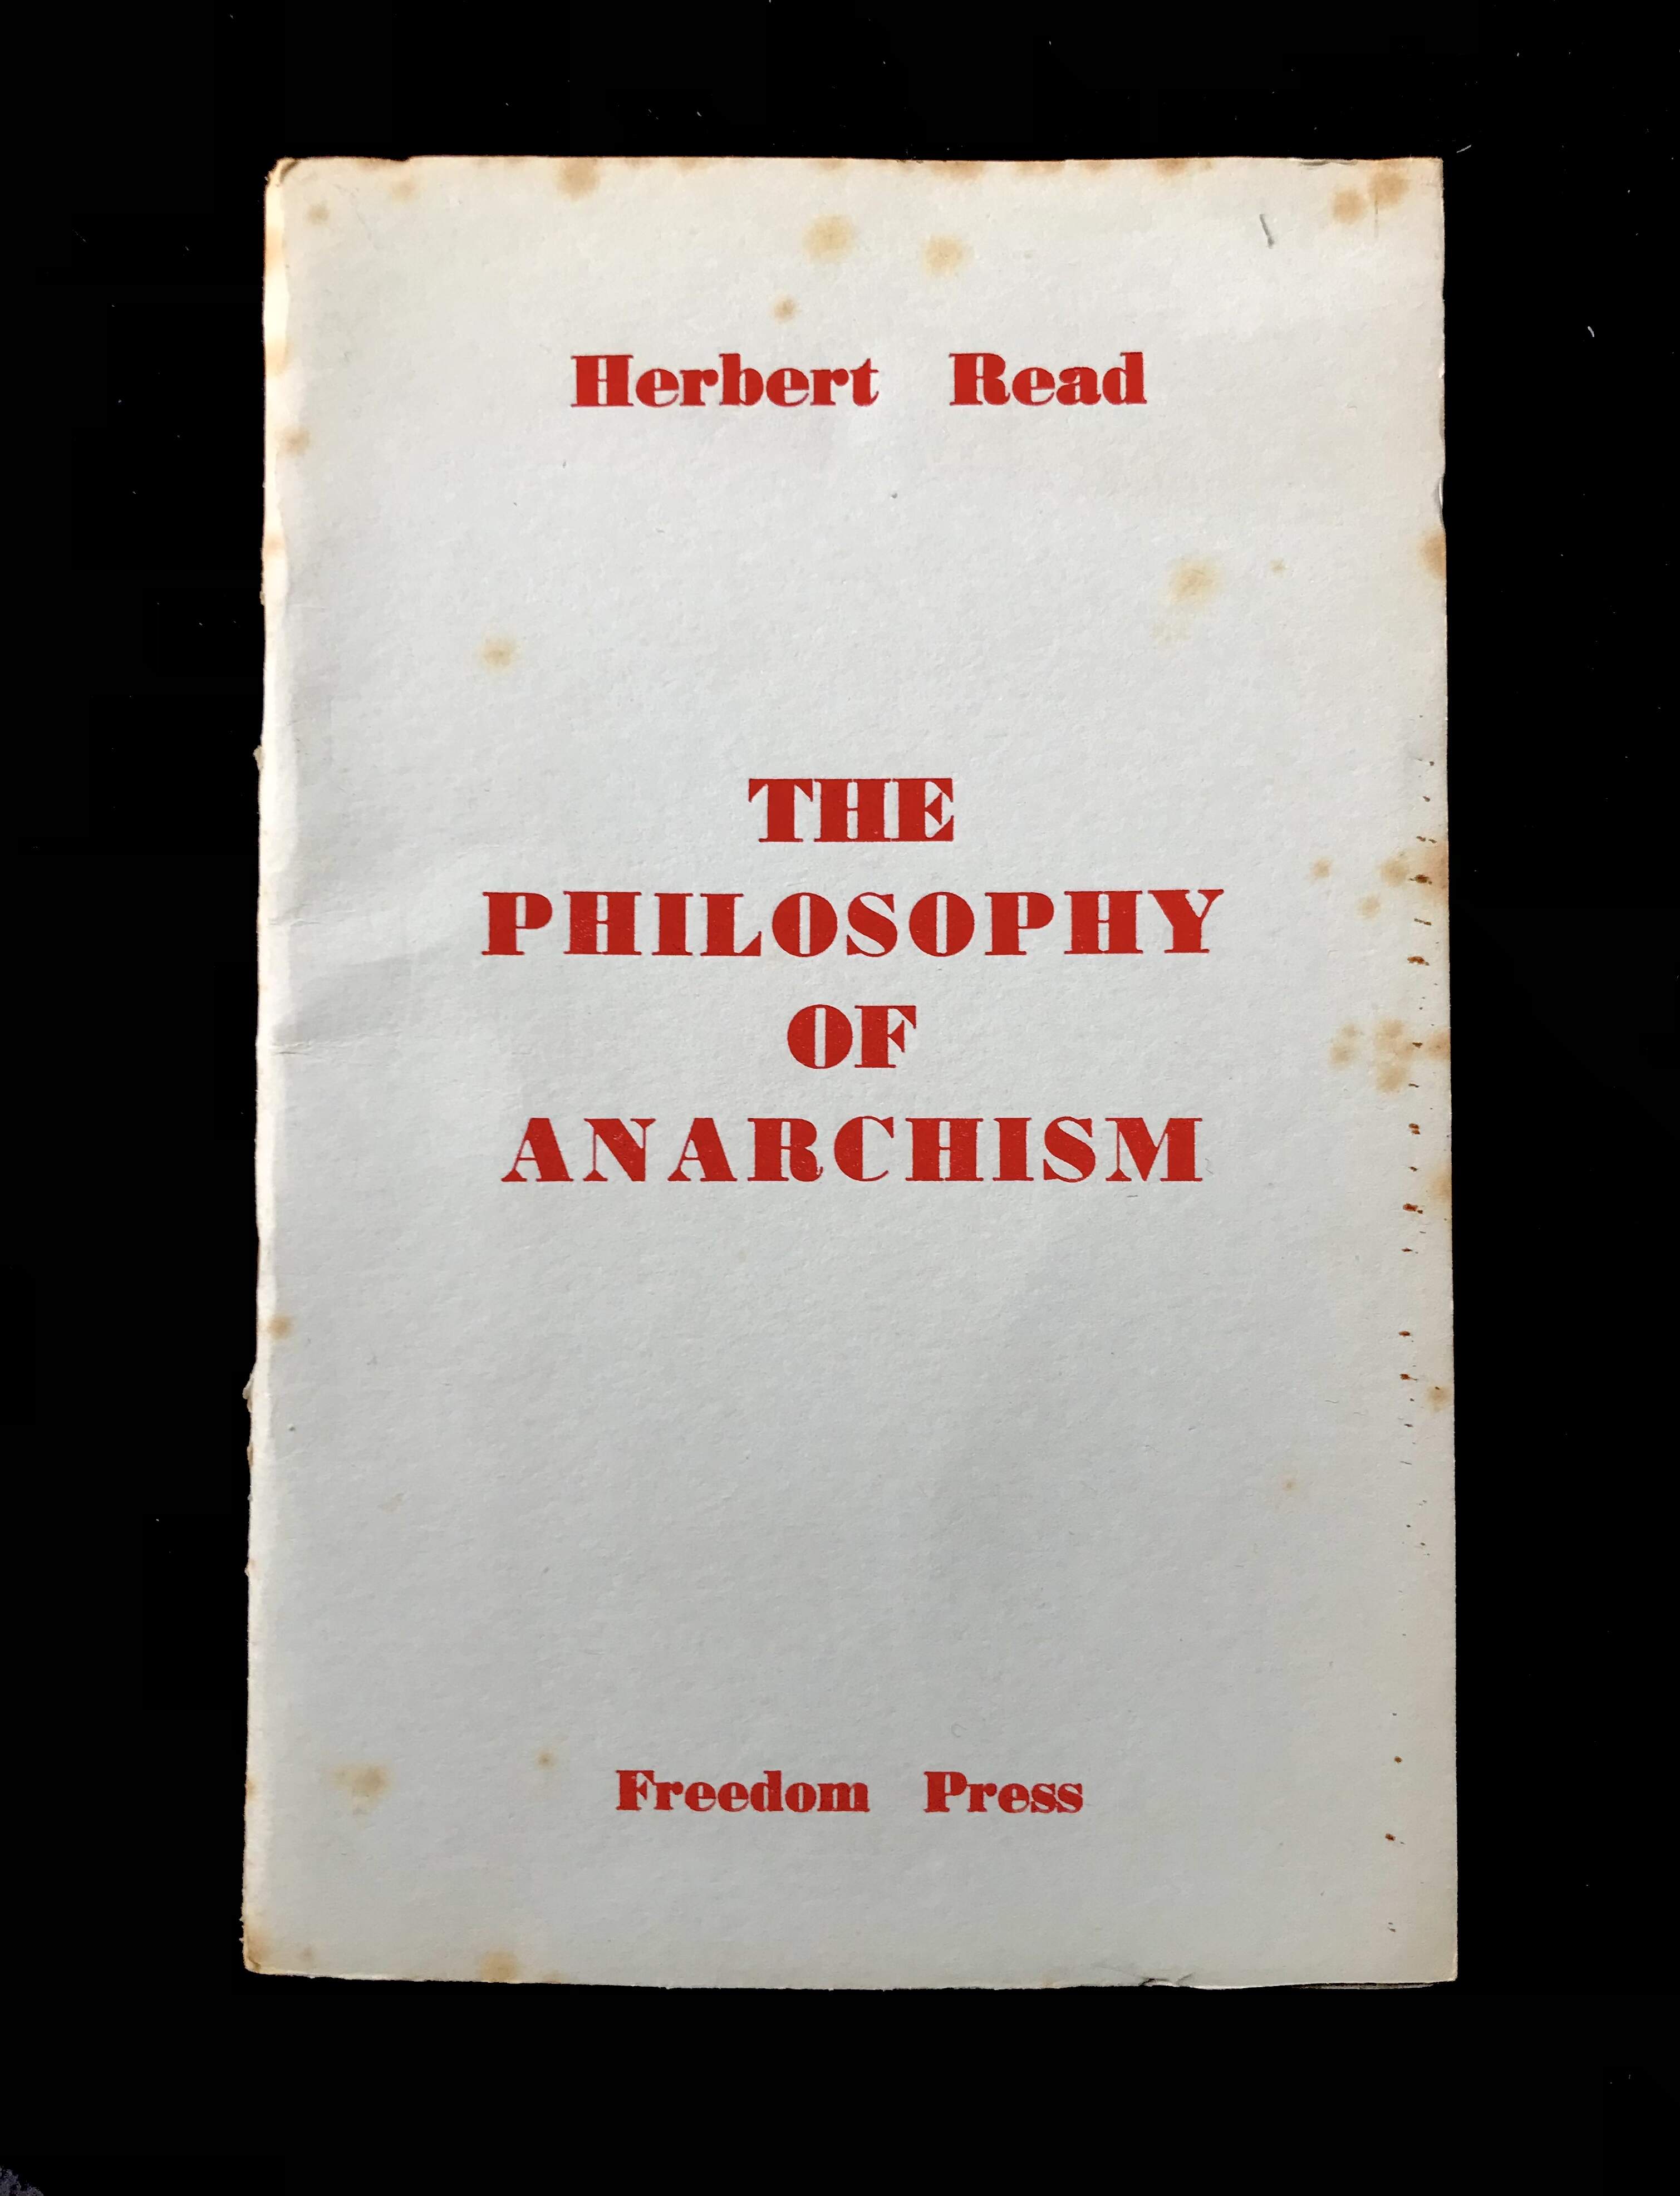 The Philosophy of Anarchism by Herbert Read